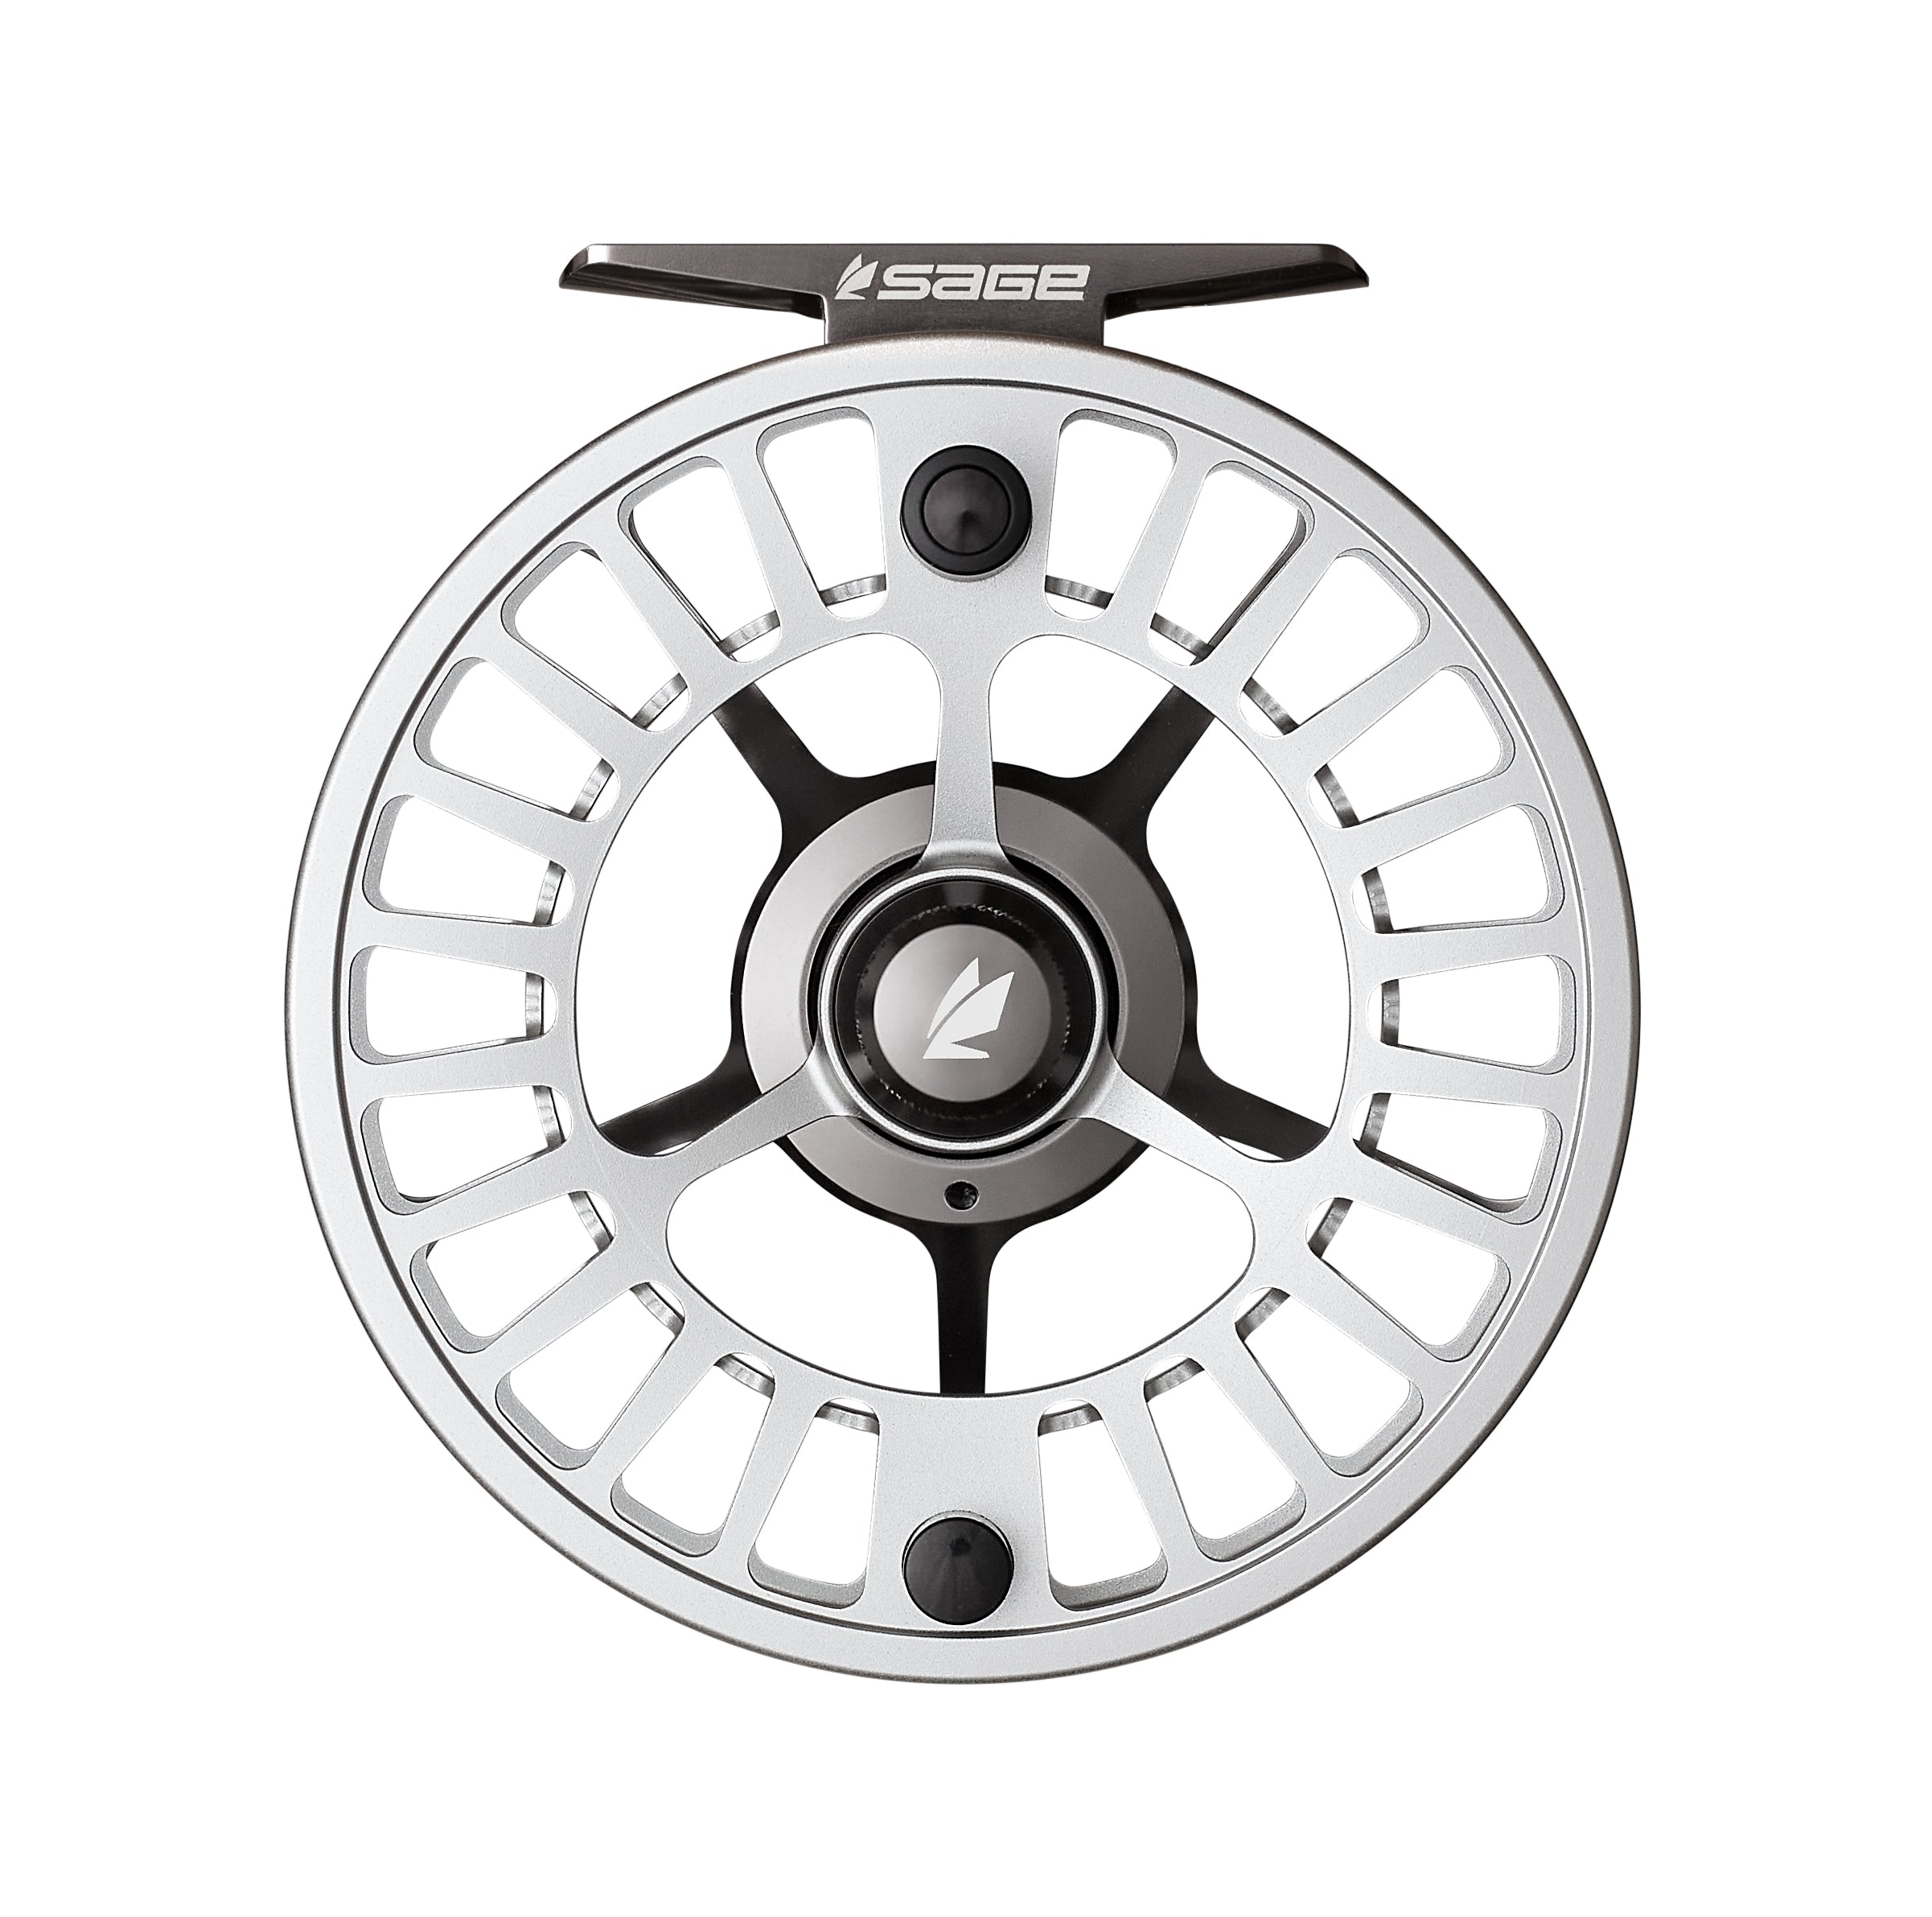 Sage ARBOR XL Fly Reel 4/5/6 - Frost Silver - NEW!